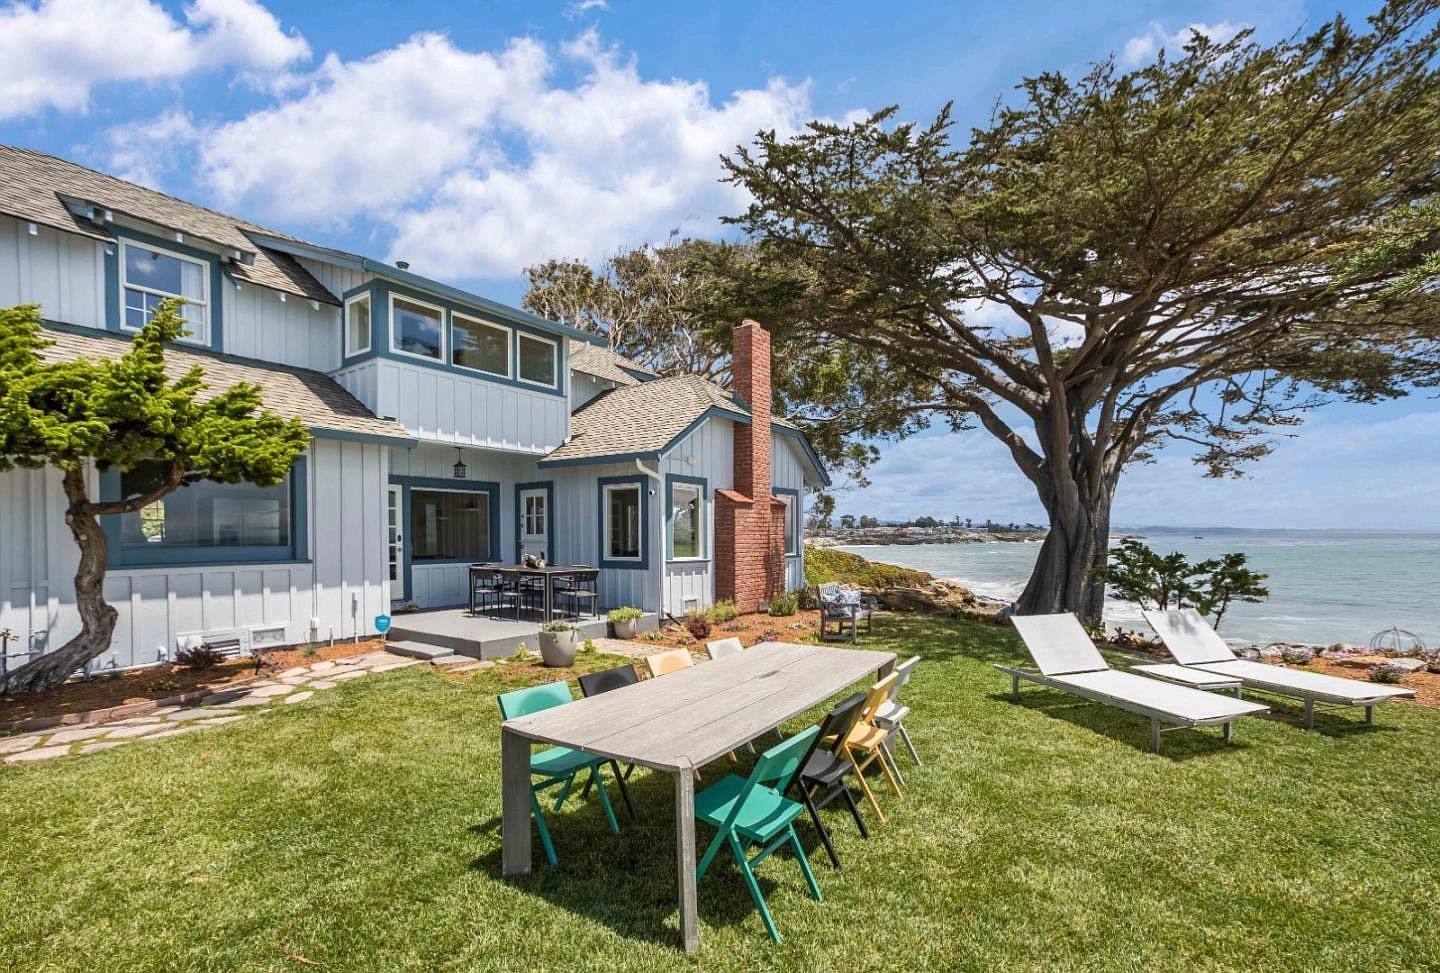 1307 W Cliff Dr, Santa Cruz, CA 95060 - $5,495,000 home for sale, house images, photos and pics gallery